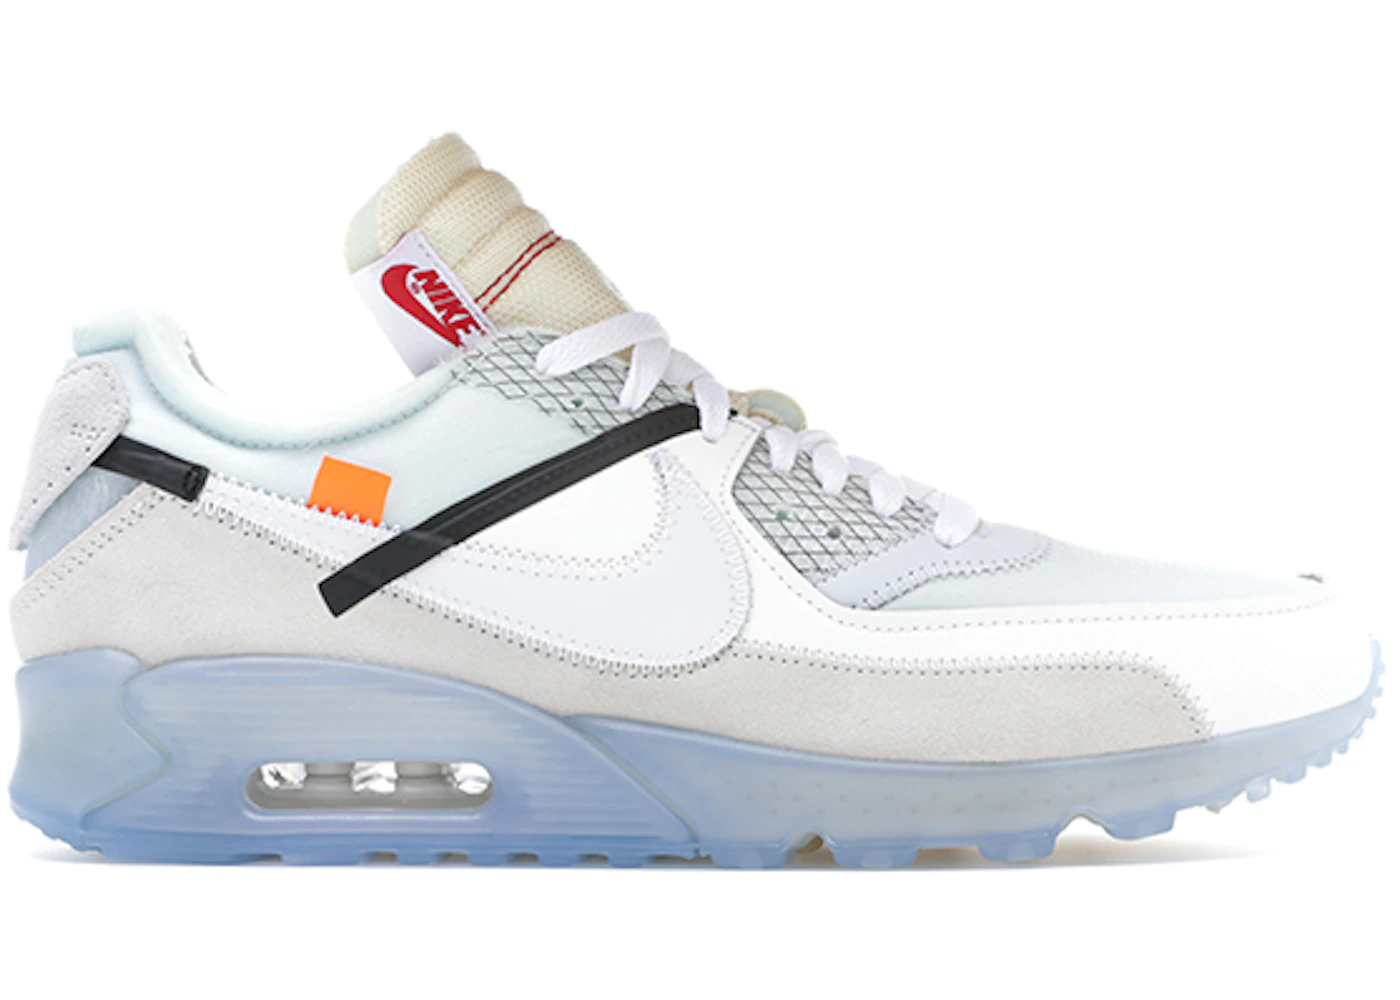 Lodge Great Barrier Reef Aja Nike Air Max 90 Off-White Men's - AA7293-100 - US